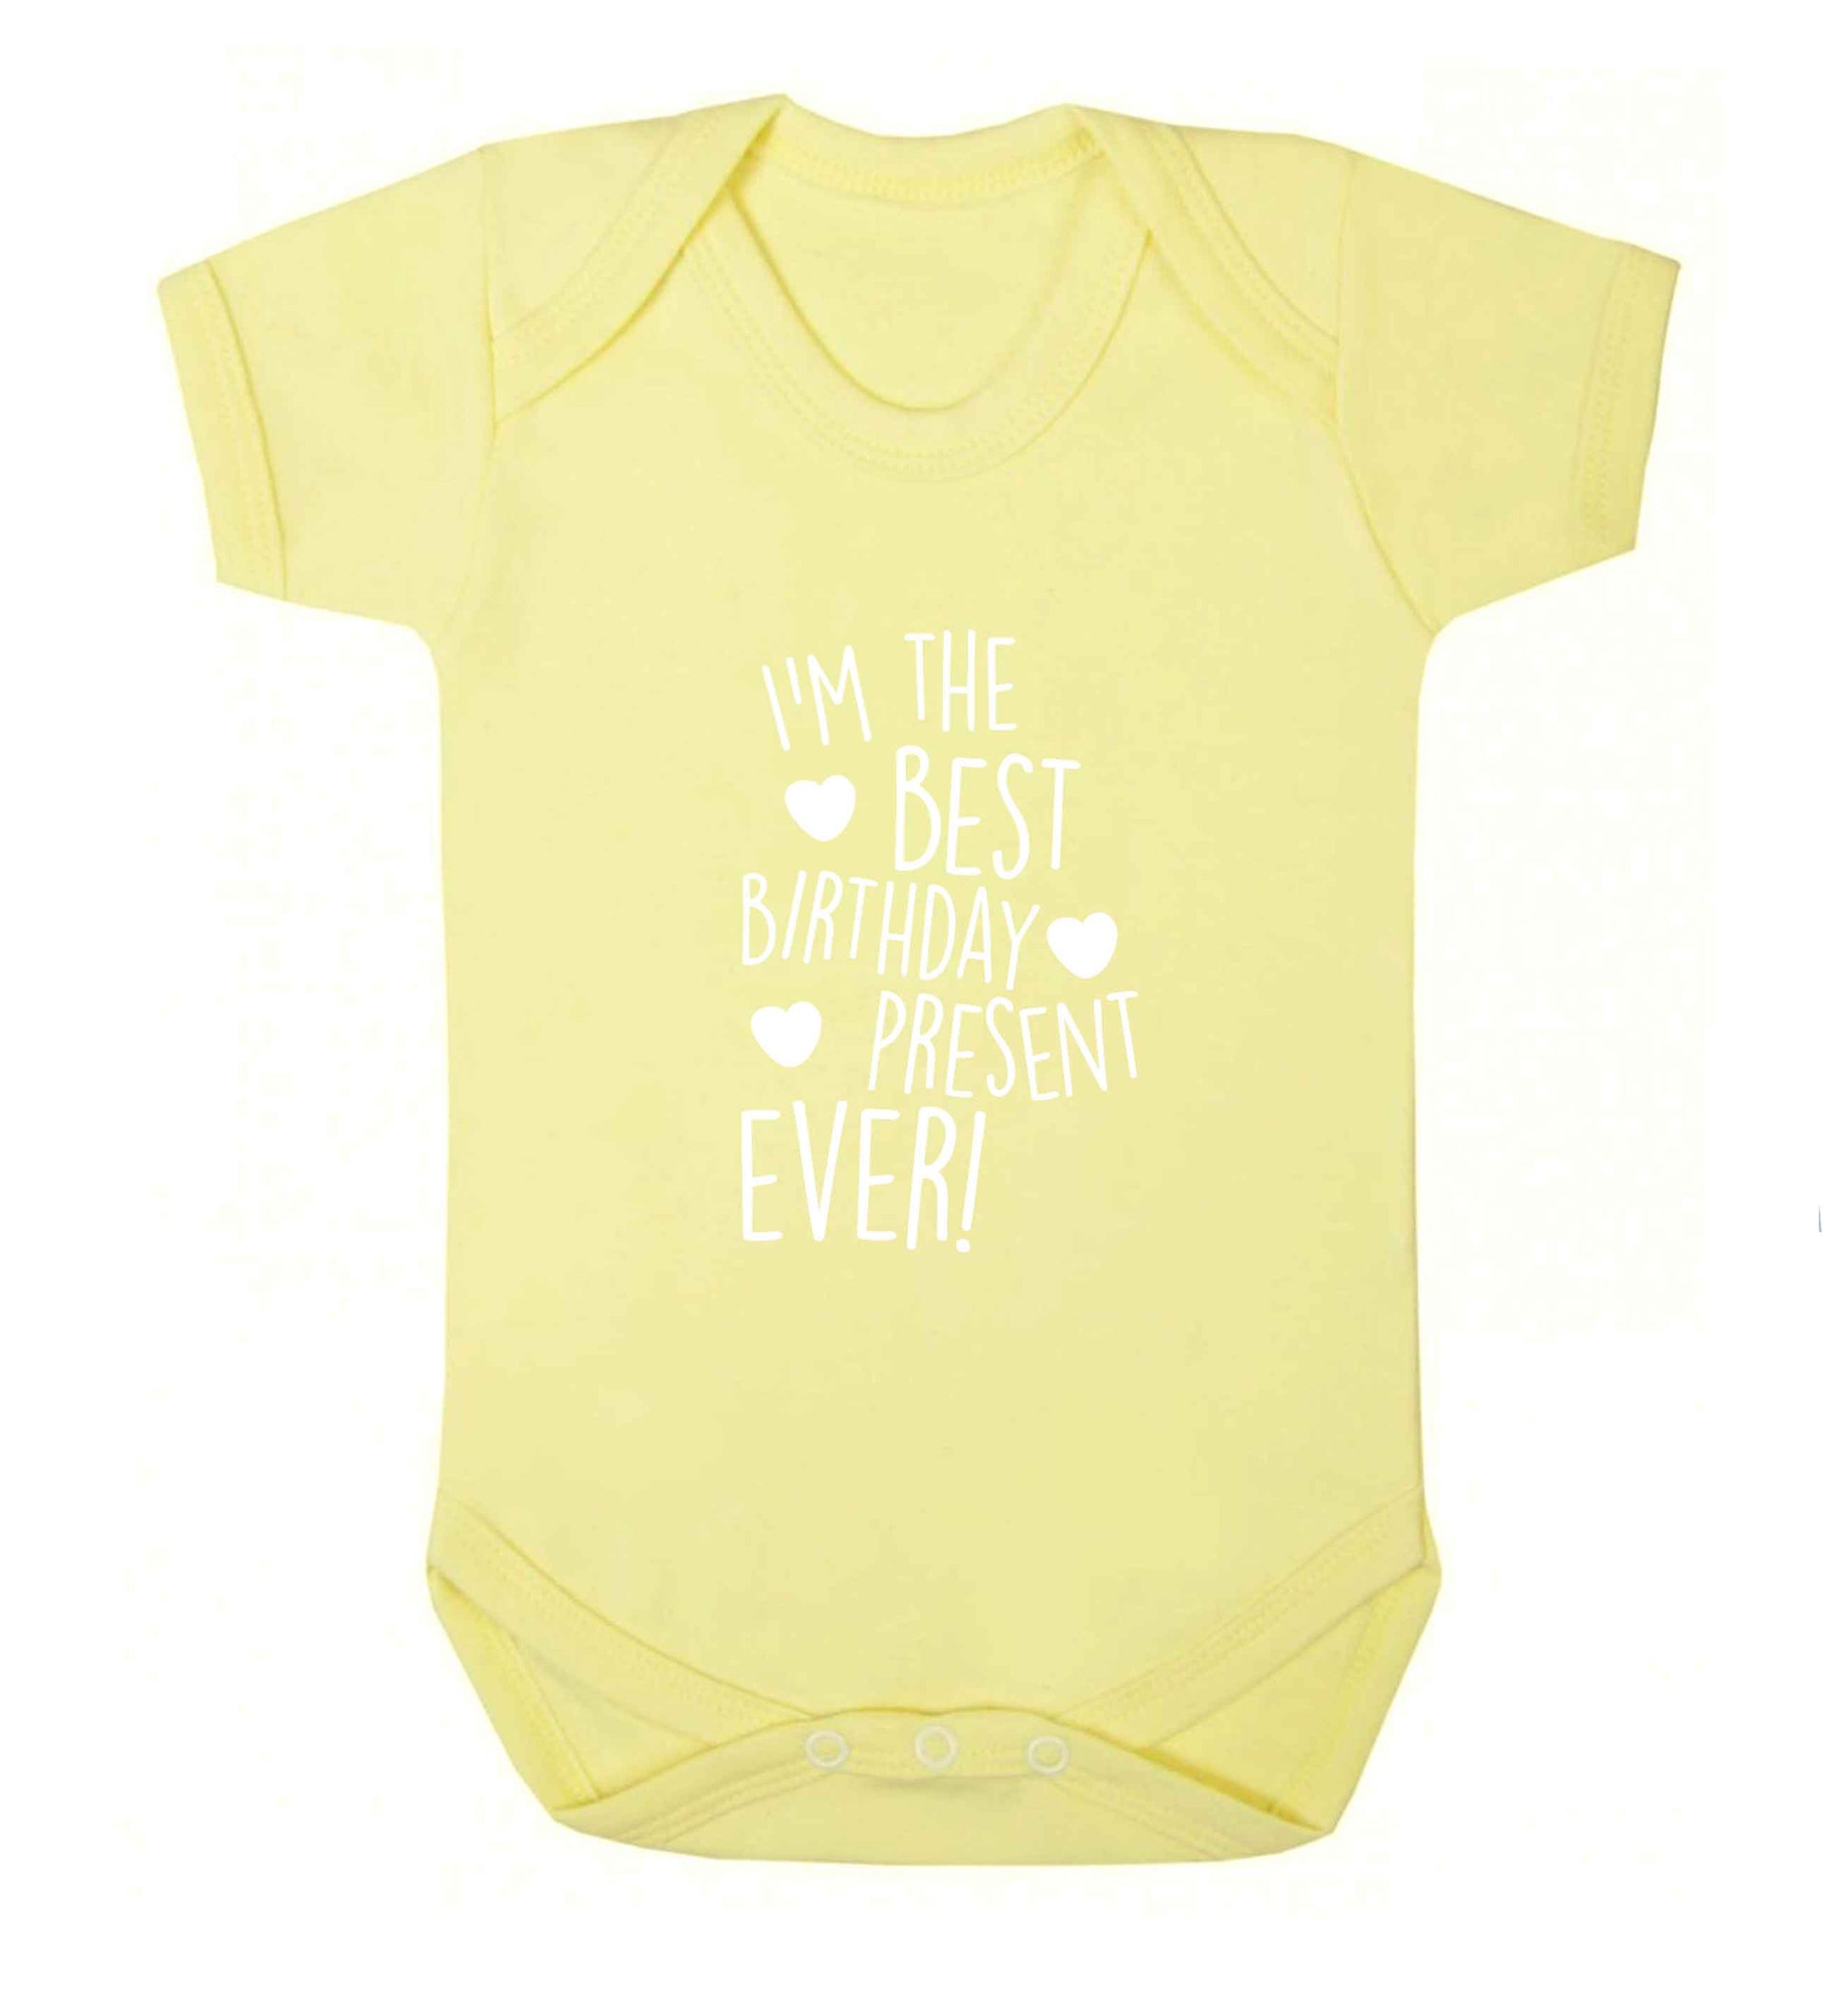 I'm the best birthday present ever baby vest pale yellow 18-24 months